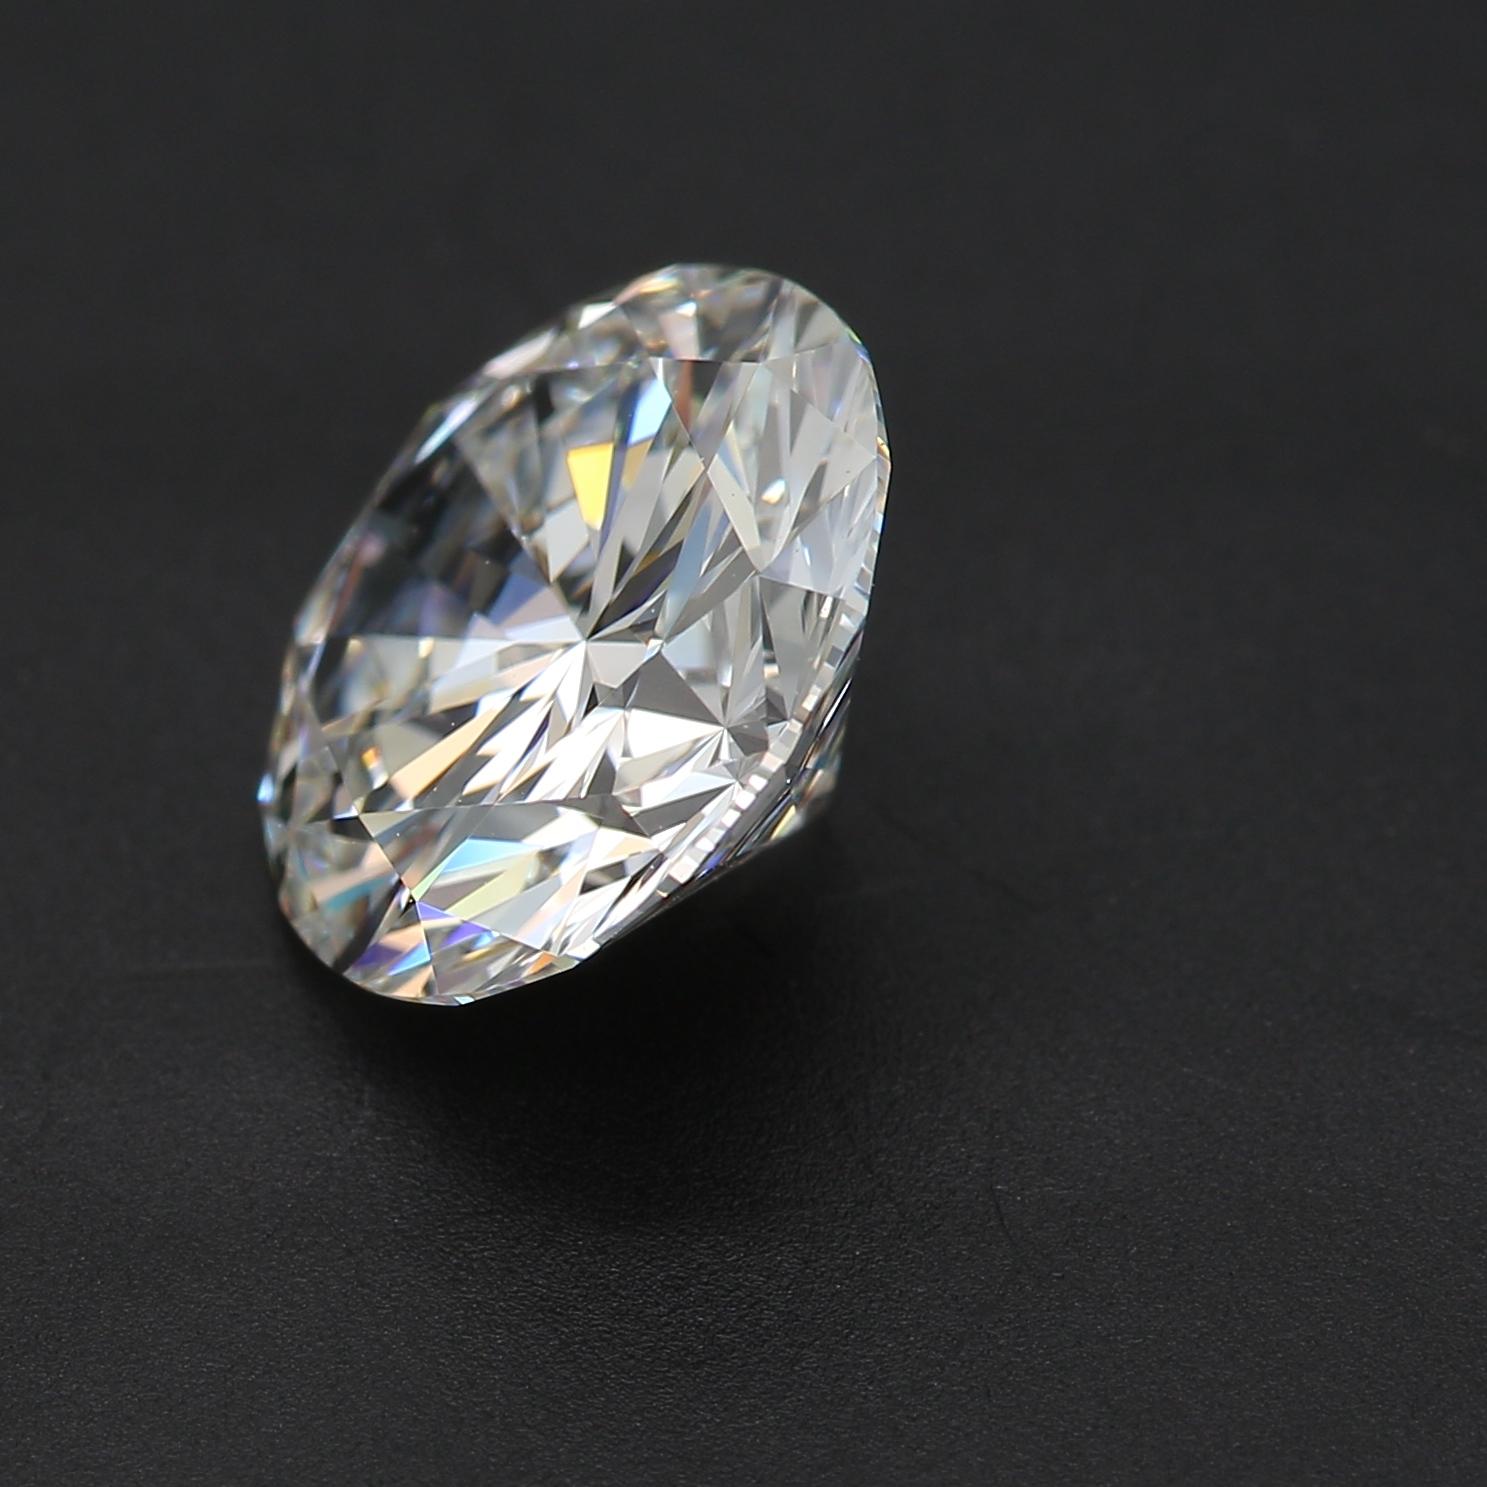 2.02 Carat Round Cut Diamond VVS1 Clarity GIA Certified In New Condition For Sale In Kowloon, HK